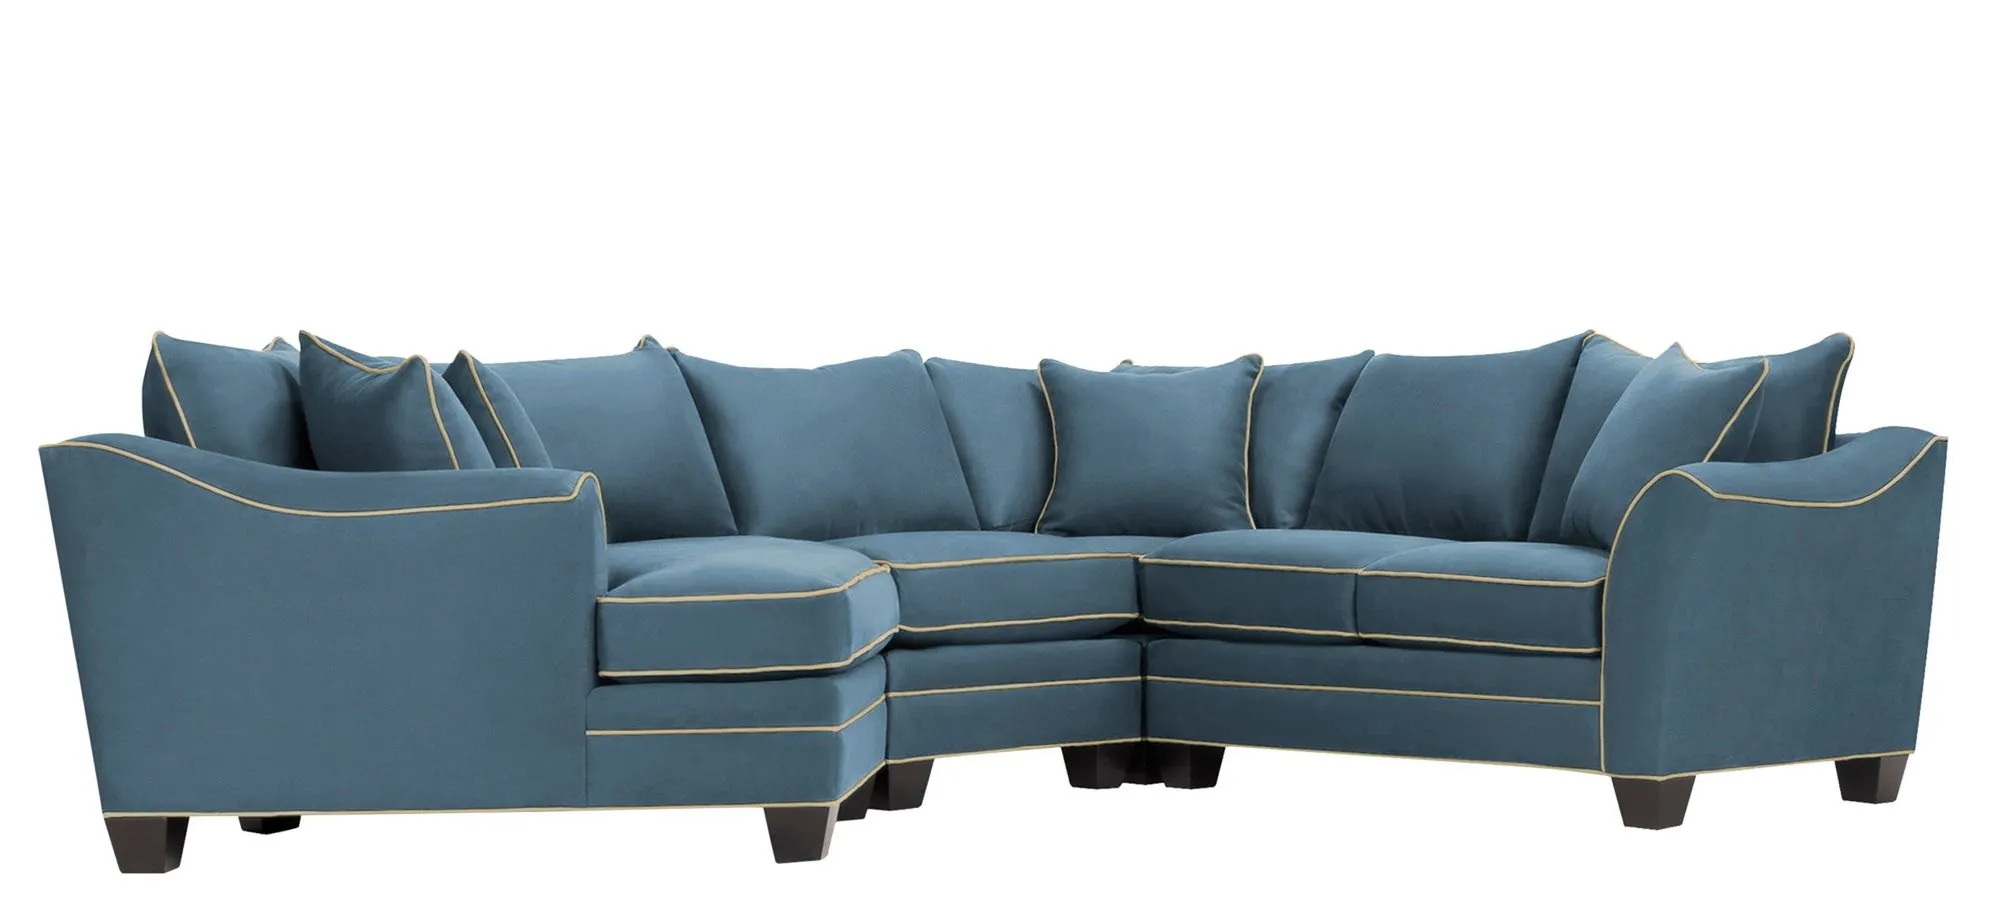 Foresthill 4-pc. Left Hand Cuddler Sectional Sofa in Suede So Soft Indigo/Mineral by H.M. Richards